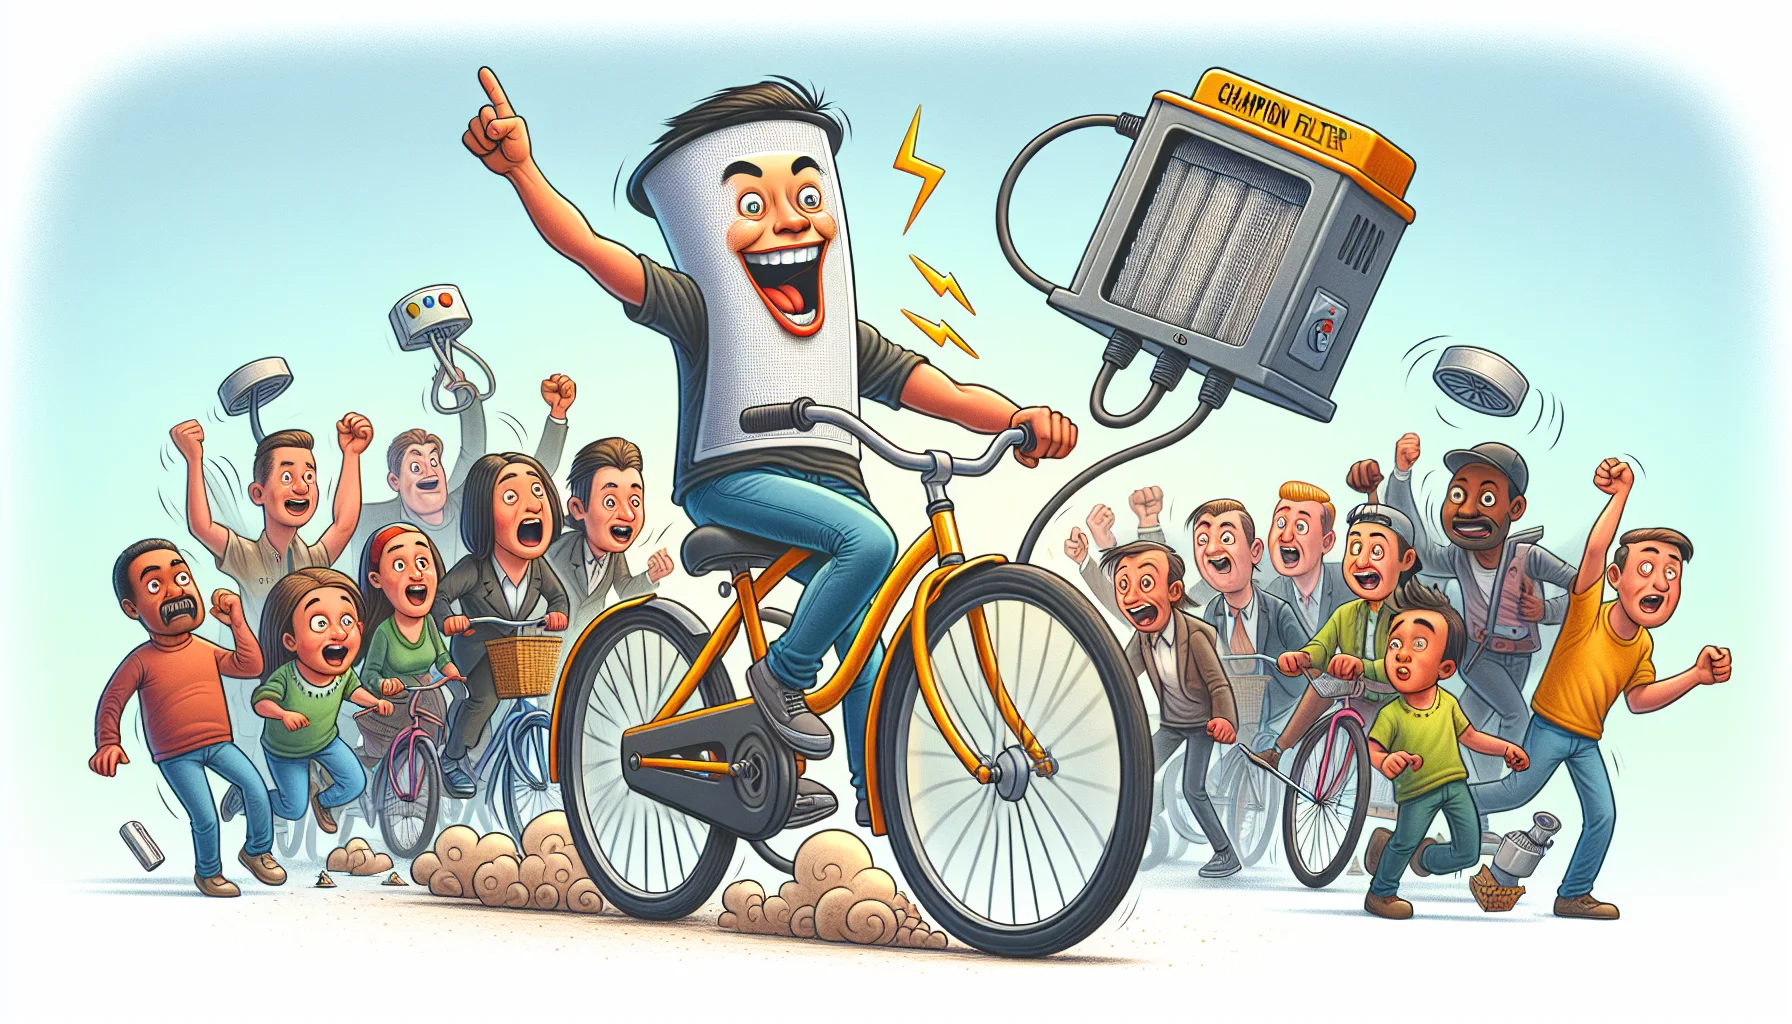 Generate a humorous yet realistic image featuring a character known as 'Champion Filter'. In this scenario, Champion Filter is cleverly and enthusiastically encouraging people to create their own electricity. He's using a bicycle-powered generator to demonstrate, while looking surprisingly energized and cheerful. Around him, people of various descents and genders are watching in awe and amusement. Some of them are starting to join in the effort, riding their own bicycle-generators with equally enthusiastic expressions. The overall environment is vibrant and captivating, effectively serving to inspire people towards eco-friendly practices.